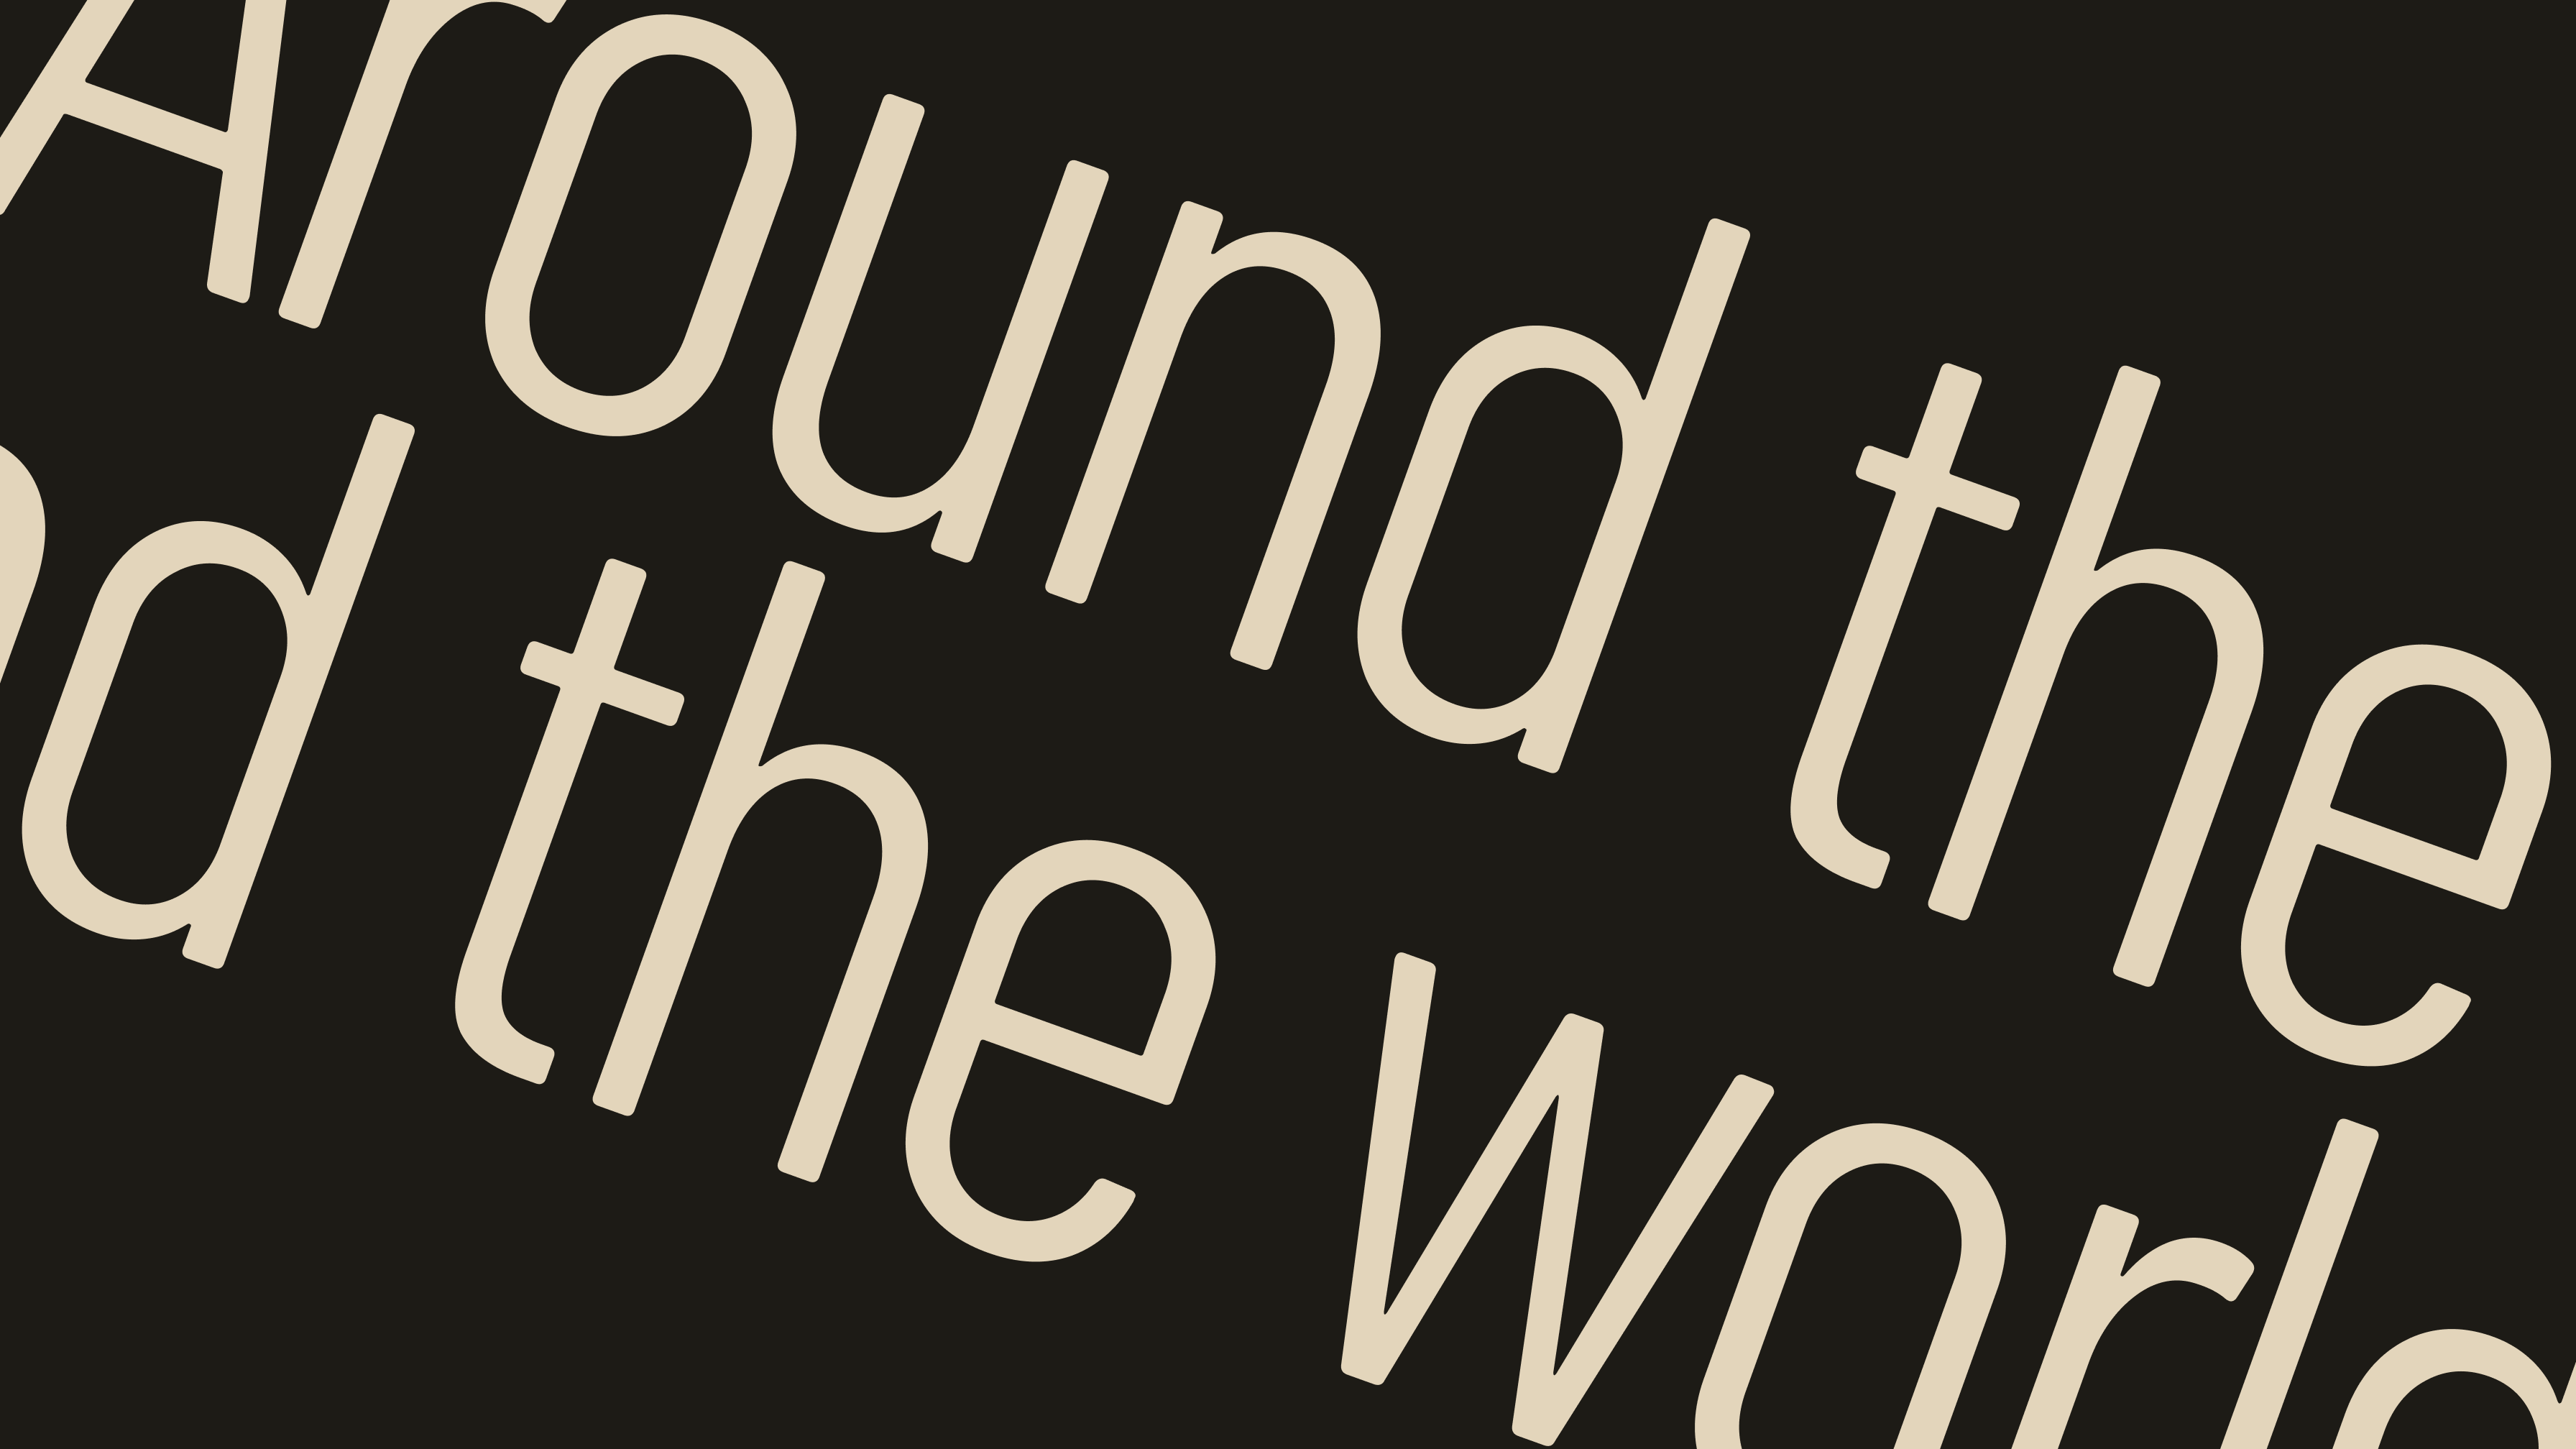 around the world with text in an interactive marquee